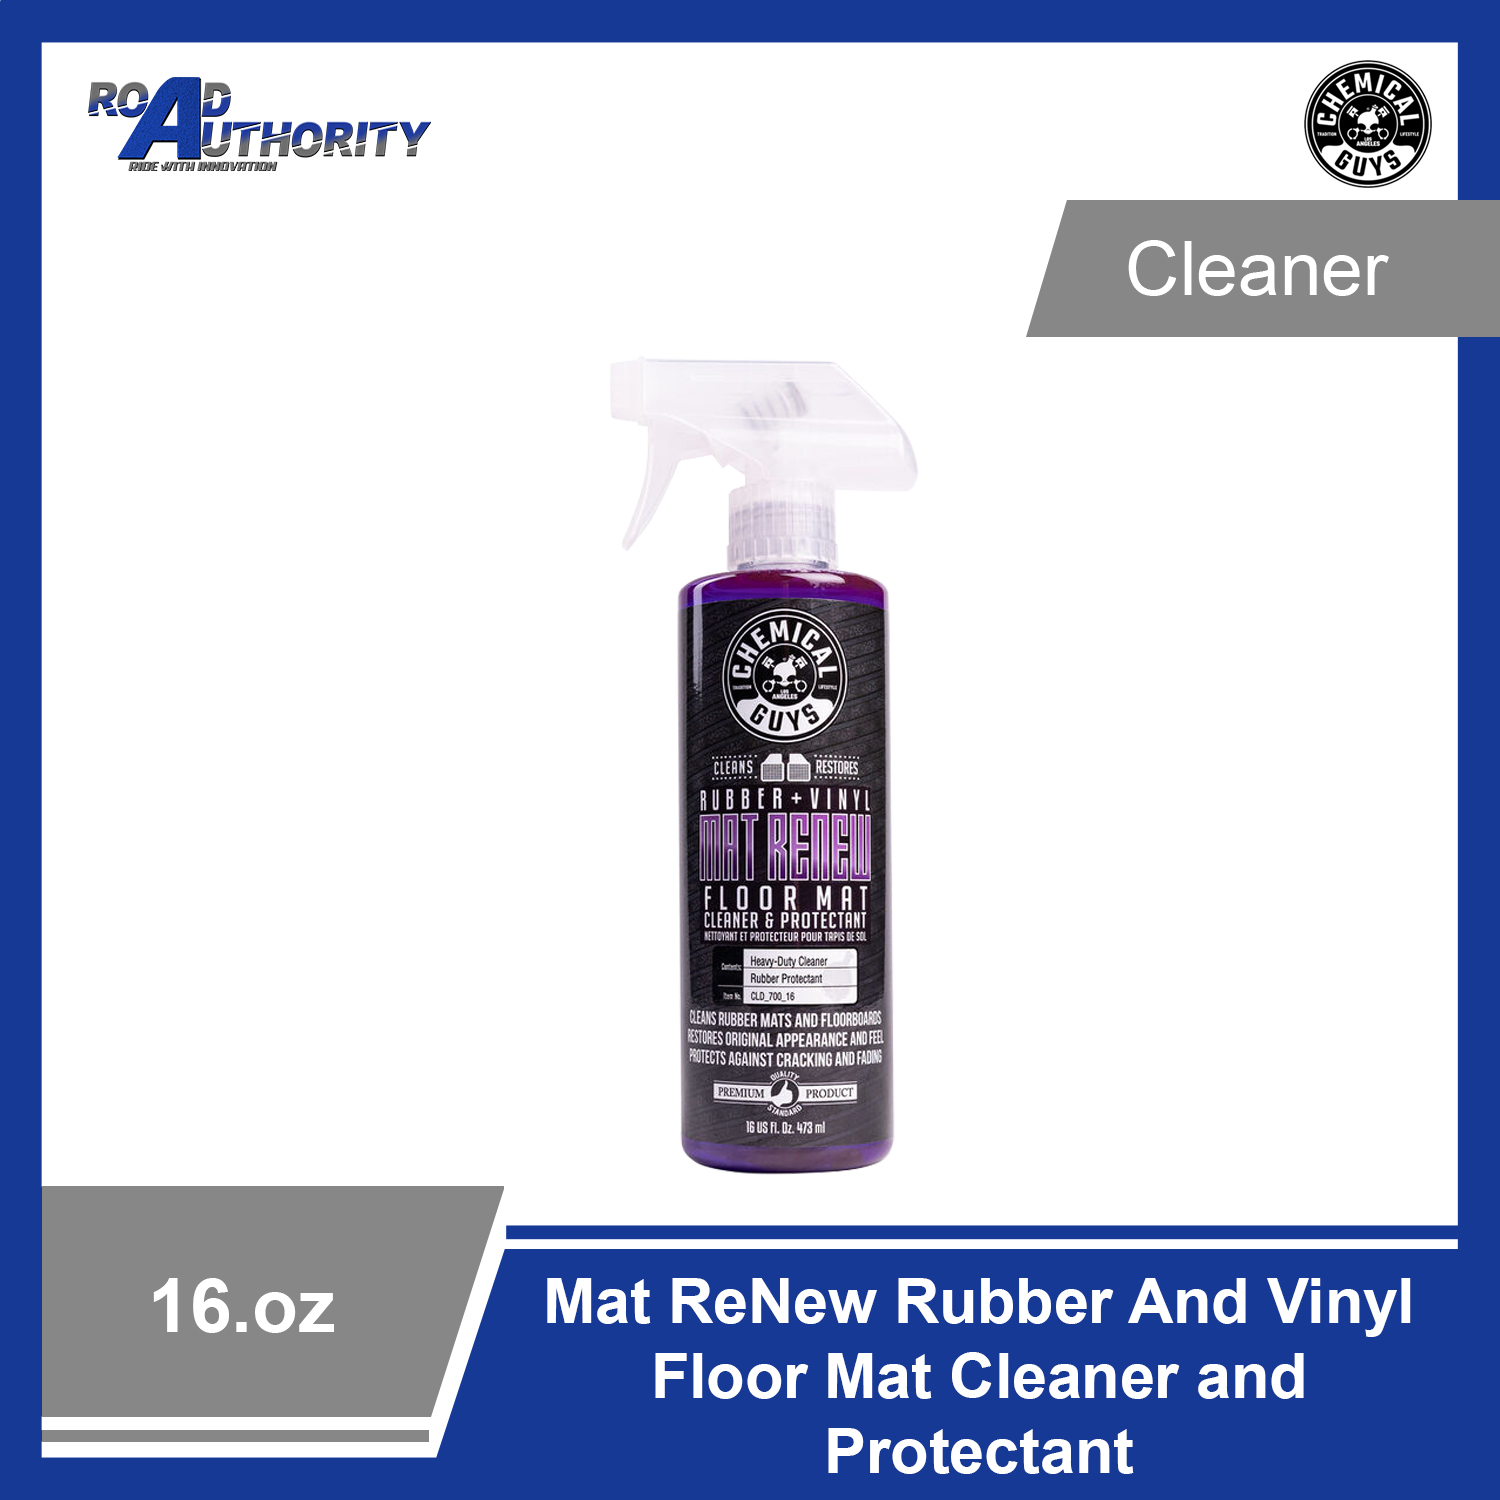 Mat Renew Rubber and Vinyl Floor Mat Cleaner and Protectant